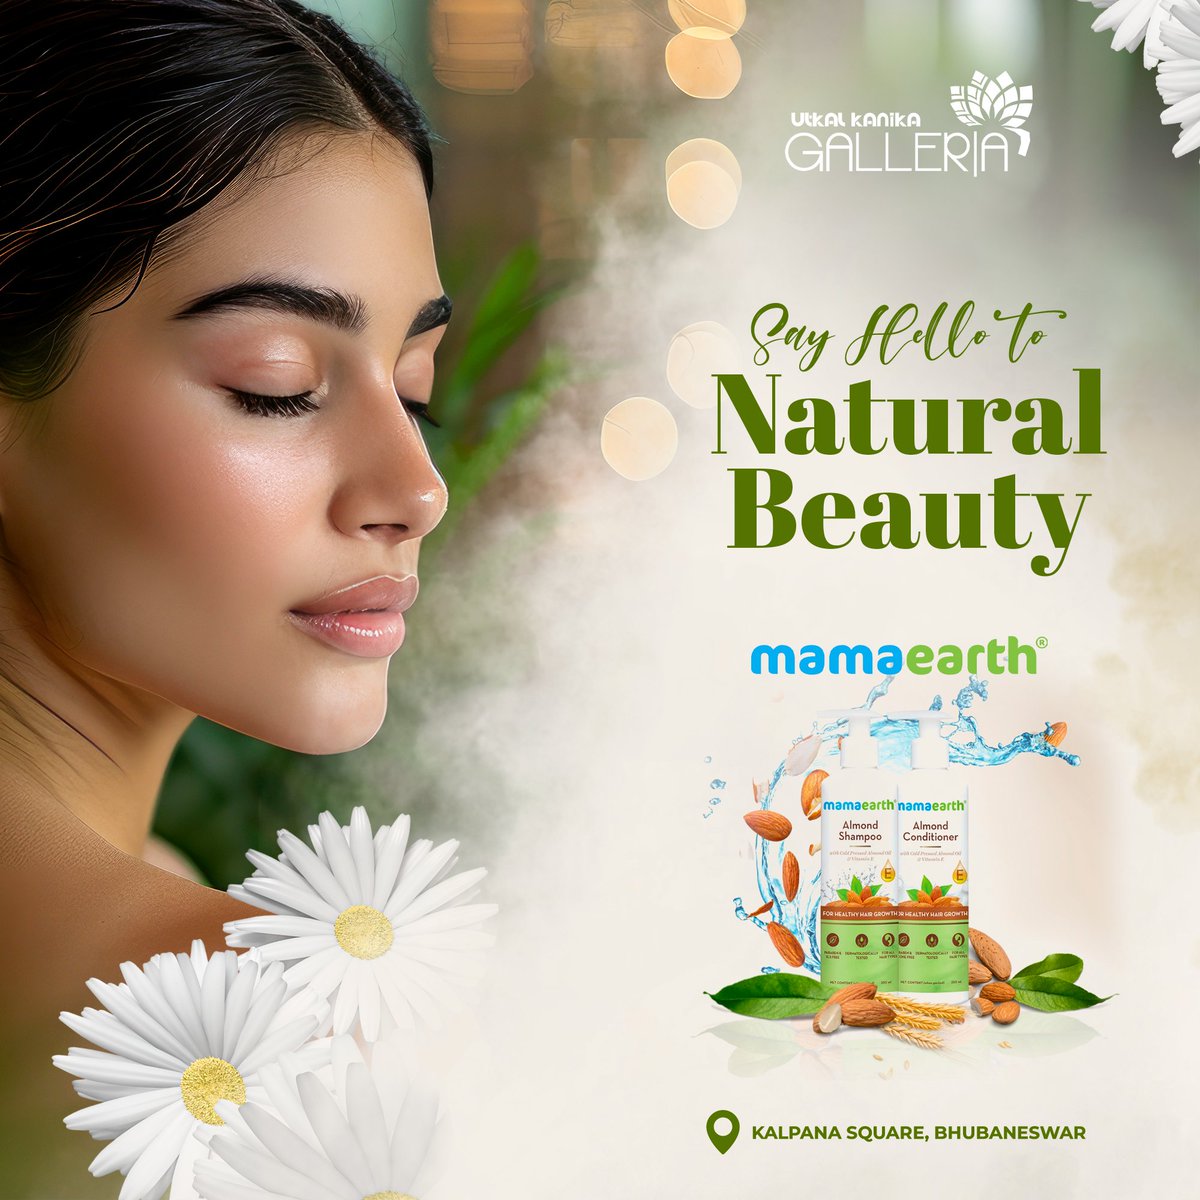 From gentle baby care essentials to nourishing skincare treats for you, our products are made with the purest ingredients and a whole lot of love.

Let's glow together with Mama Earth! 🌍💚 

#MamaEarth #NaturalBeauty #LoveForNature #GlowNaturally #UtkalKanikaGalleria